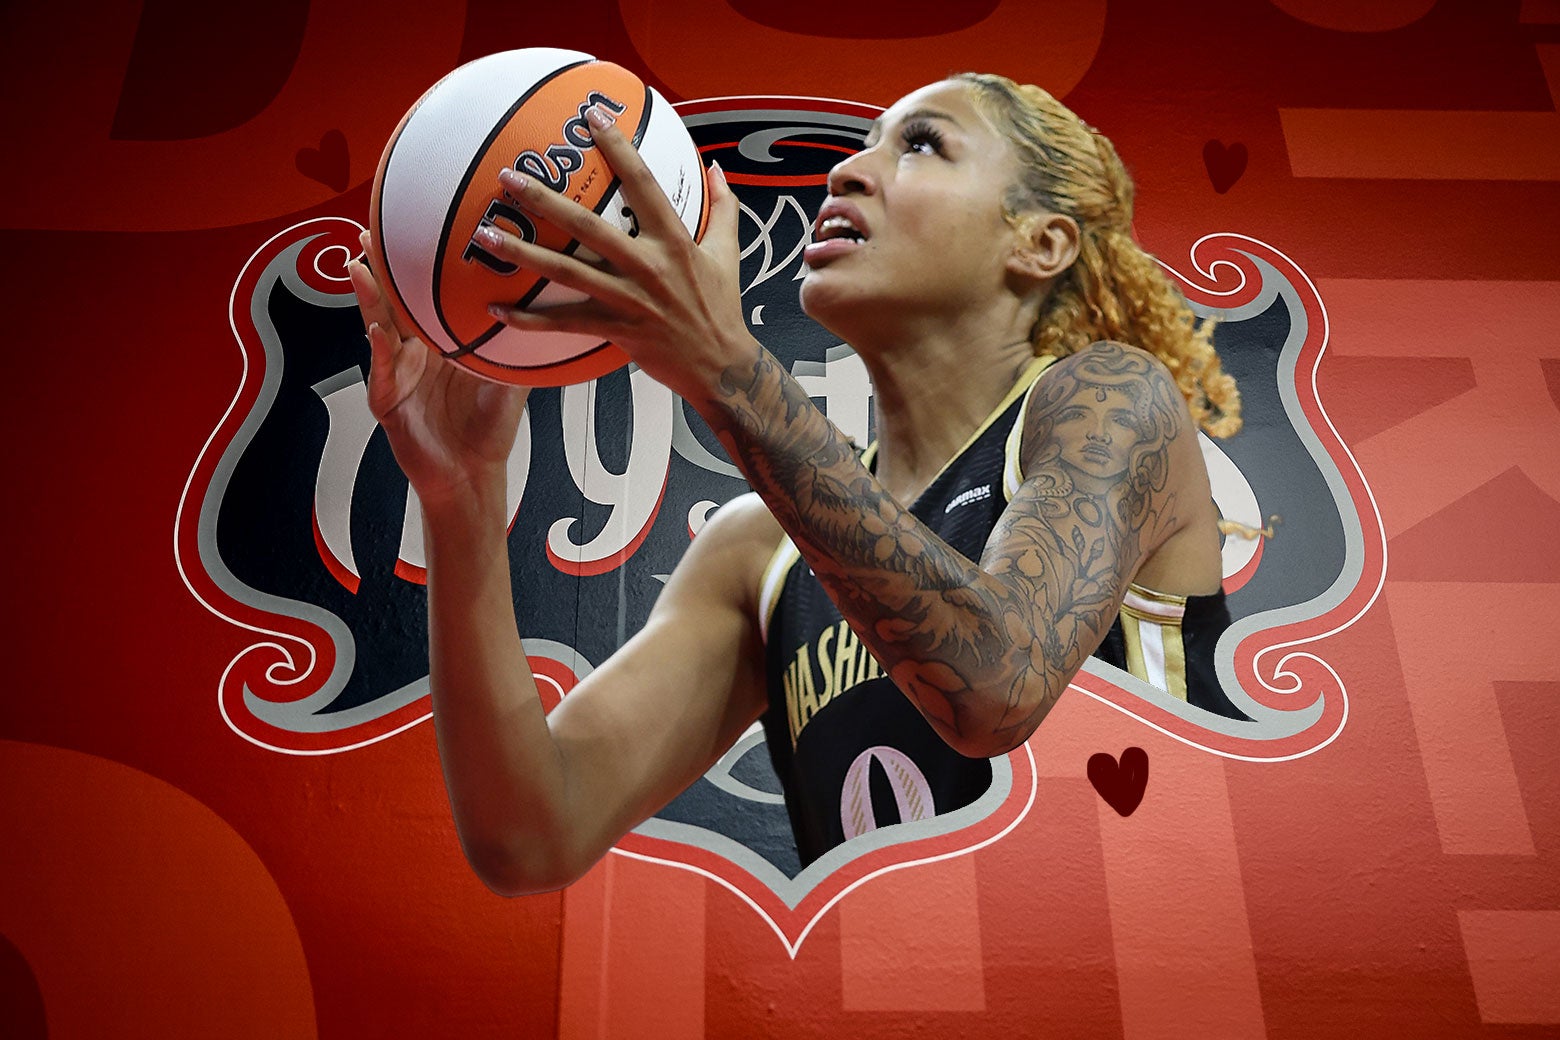 Shakira Austin shoots, Photoshopped in front of the Washington Mystics logo, illustrated with a heart and a crest around both.